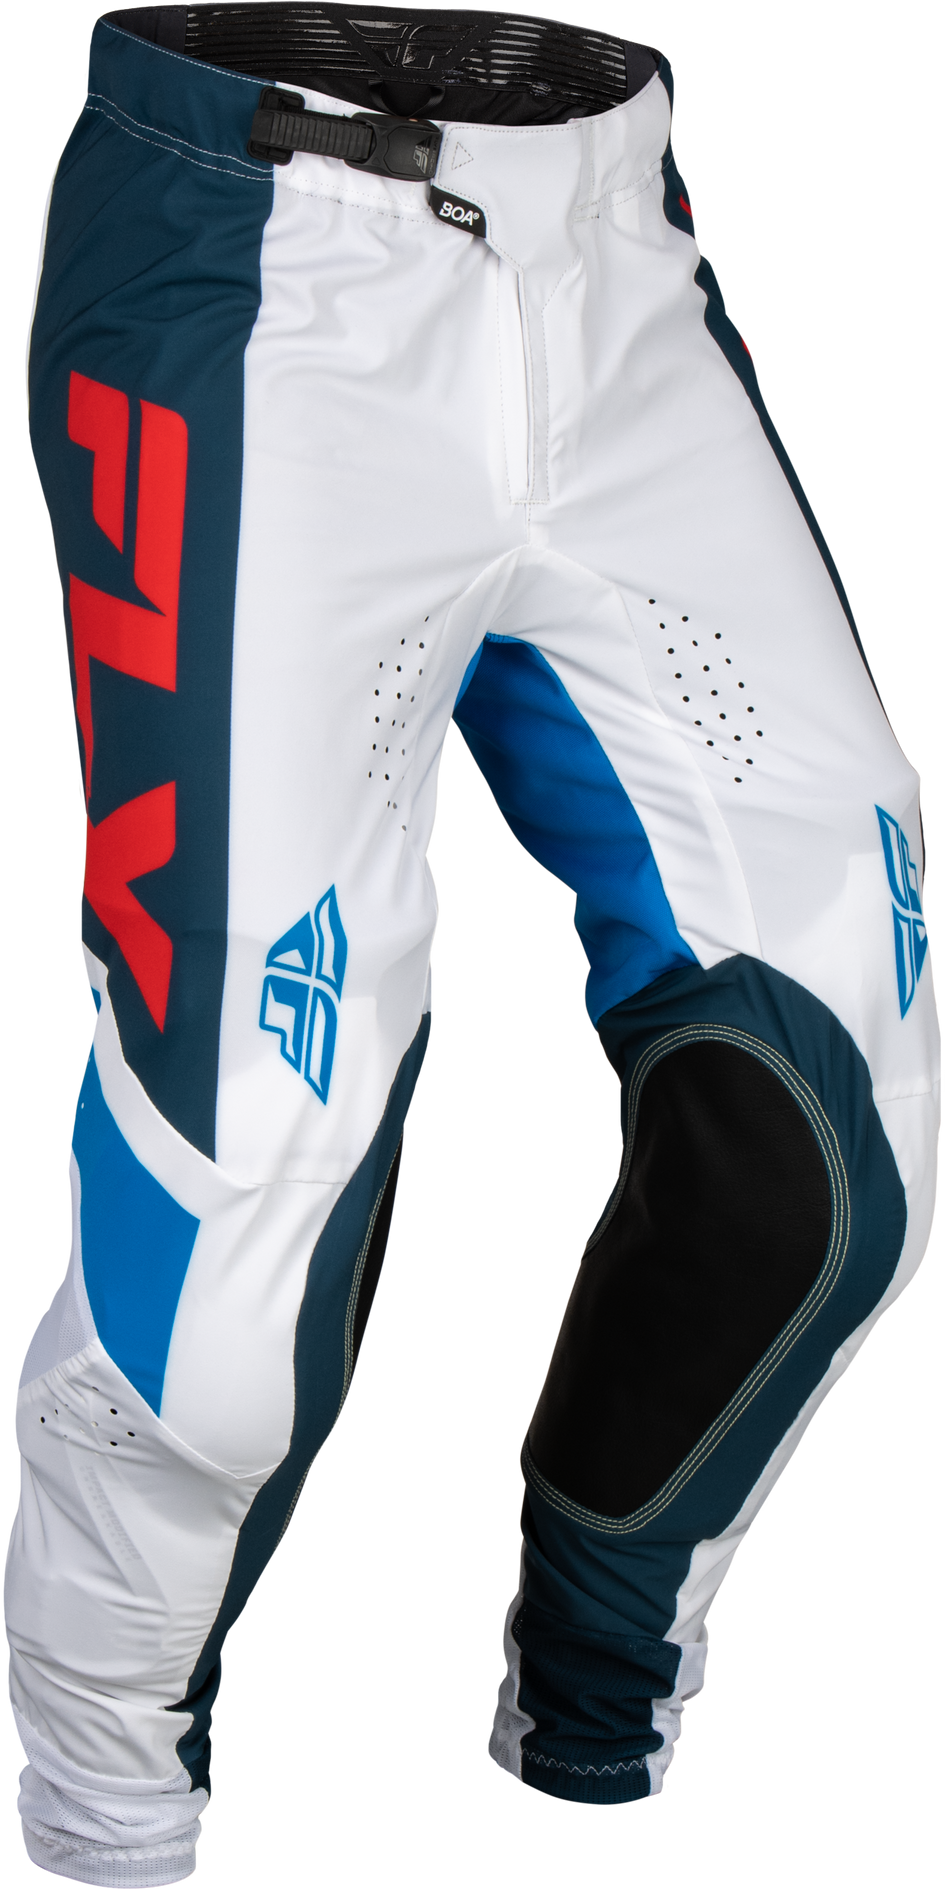 FLY RACING Youth Lite Pants Red/White/Navy Sz 26 377-73326